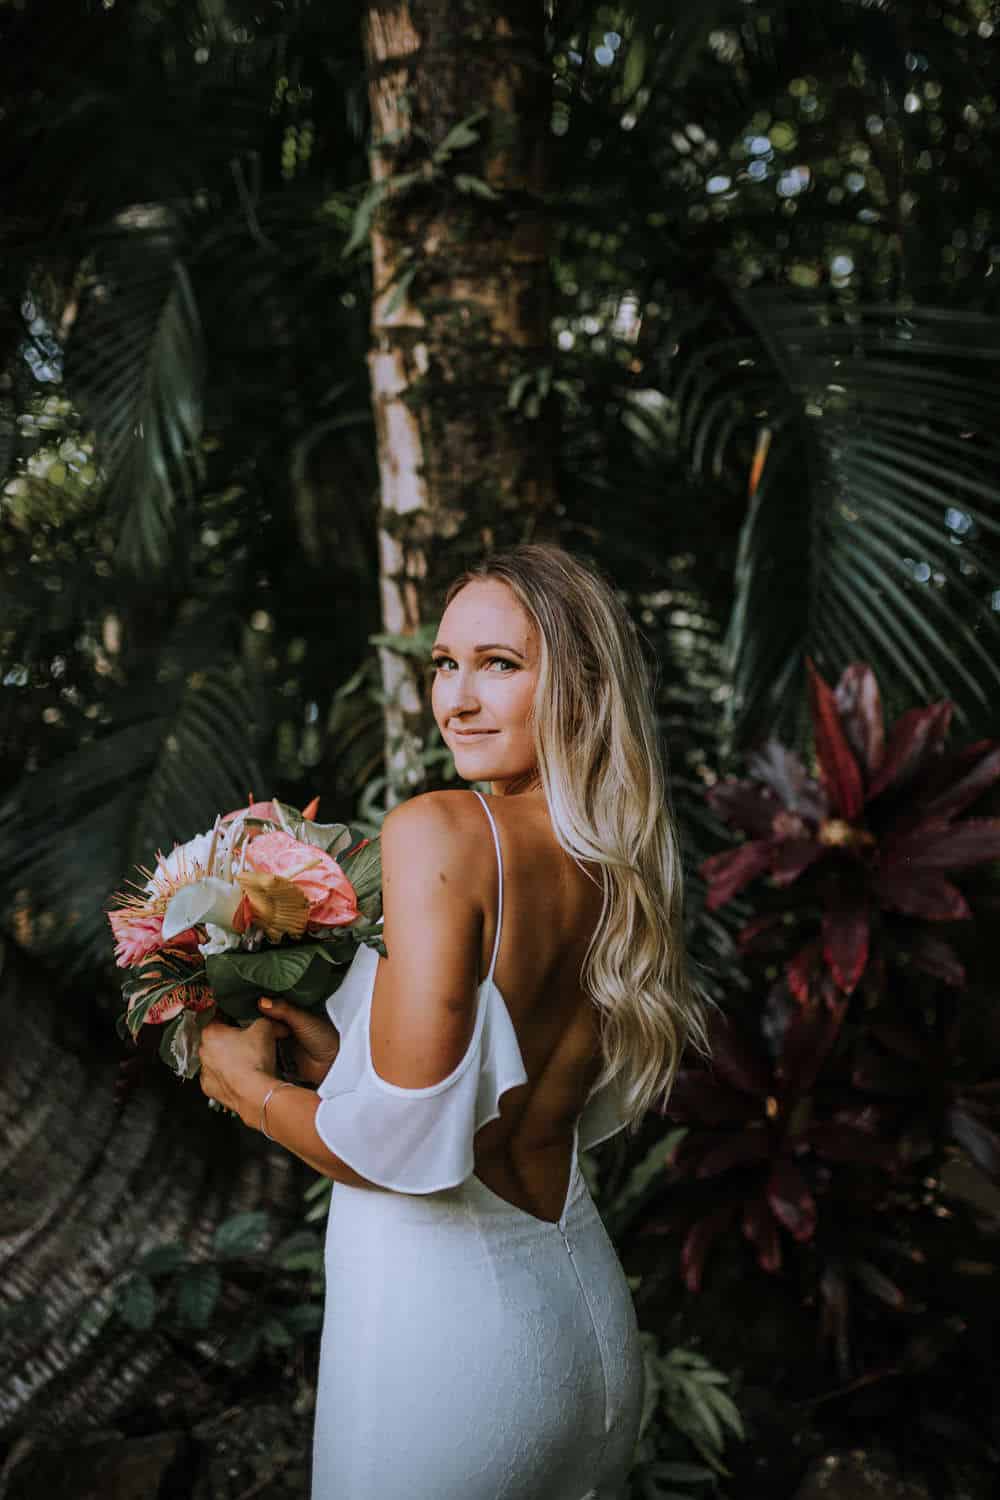 Budgeting tips for wedding/elopement by Anela Benavides, Hawaii based photographer